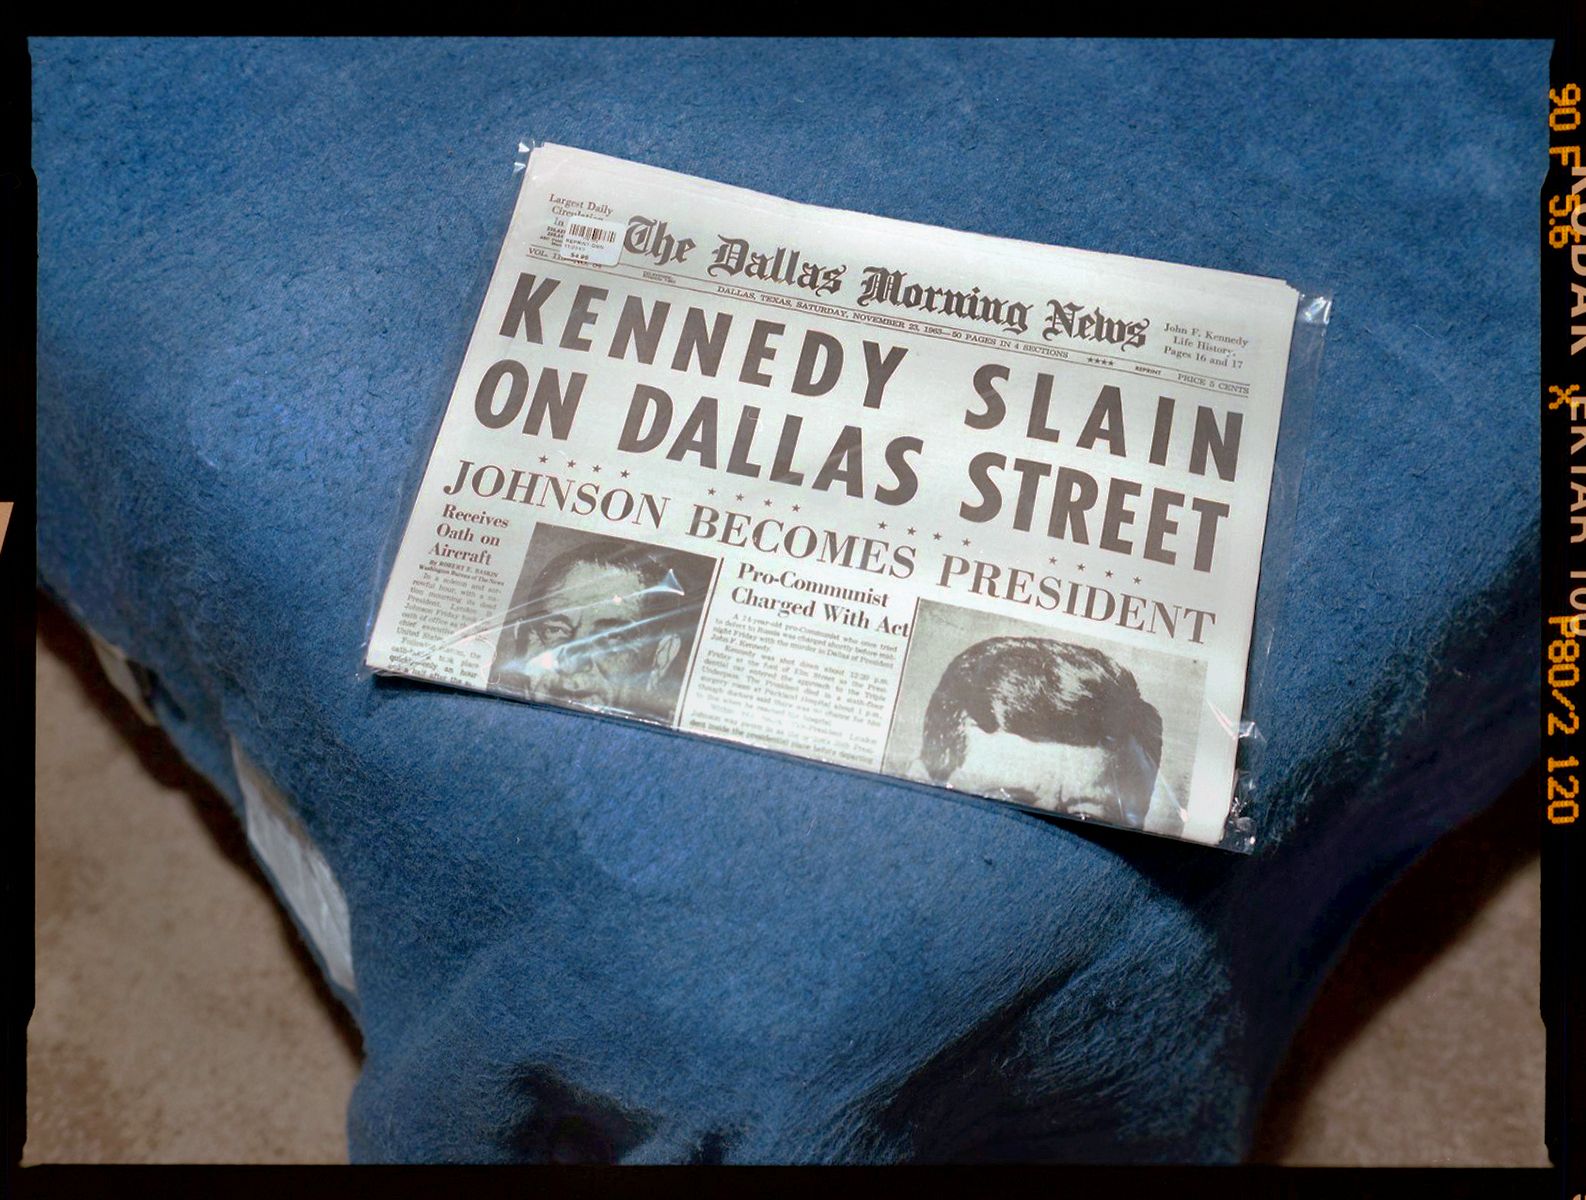 MEMORIAL REPRINT OF THE 1963 'DALLAS MORNING NEWS', FOR THE OBSERVANCE OF THE 50TH YEAR SINCE JOHN F. KENNEDY'S ASSASSINATION